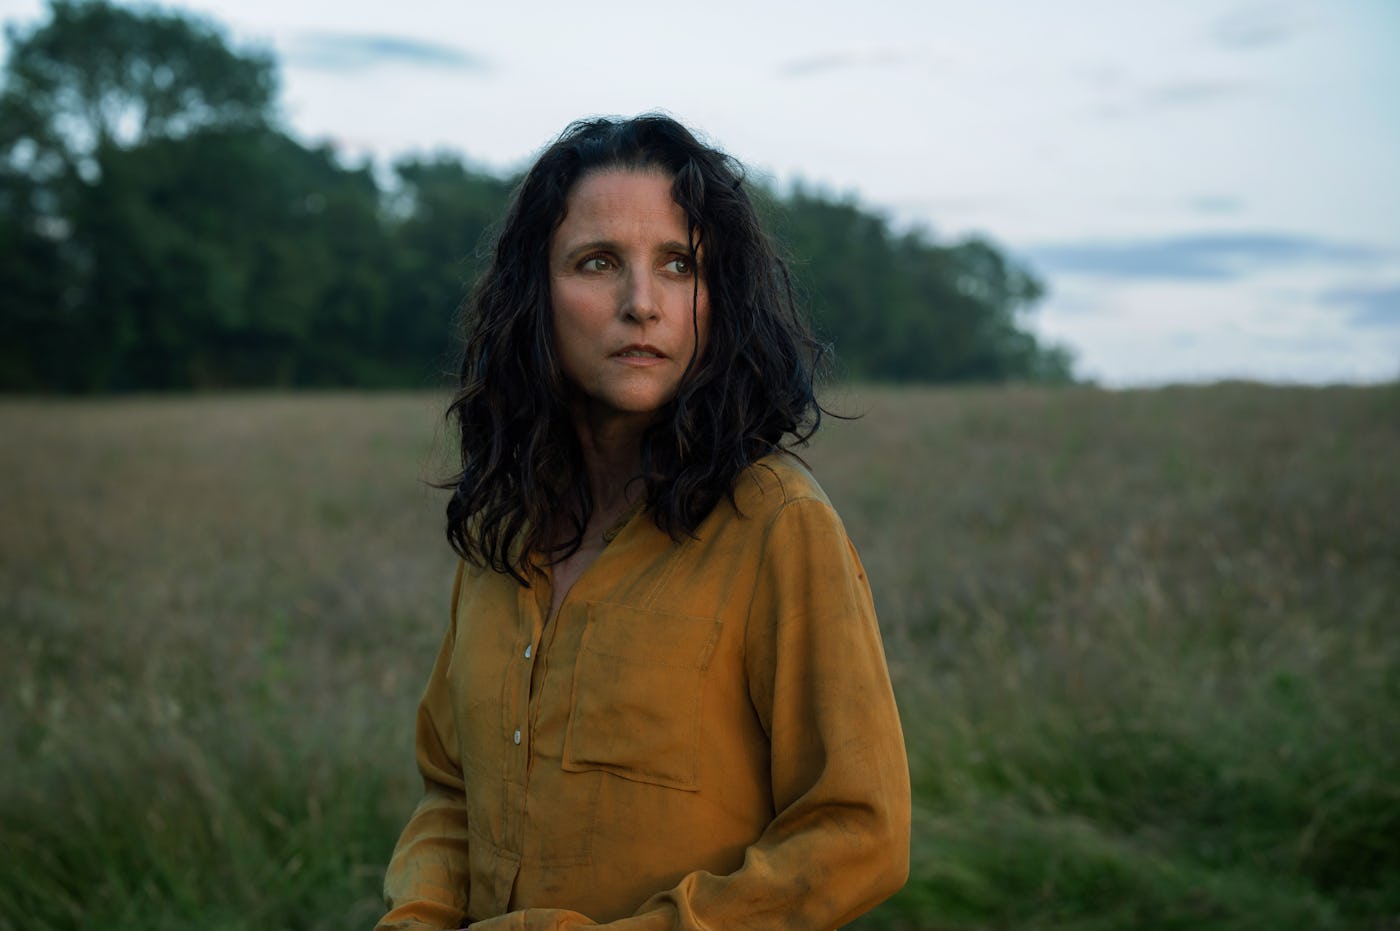 A woman with curly dark hair, wearing an ochre shirt, stands in a field at dusk, looking intensely to the side.